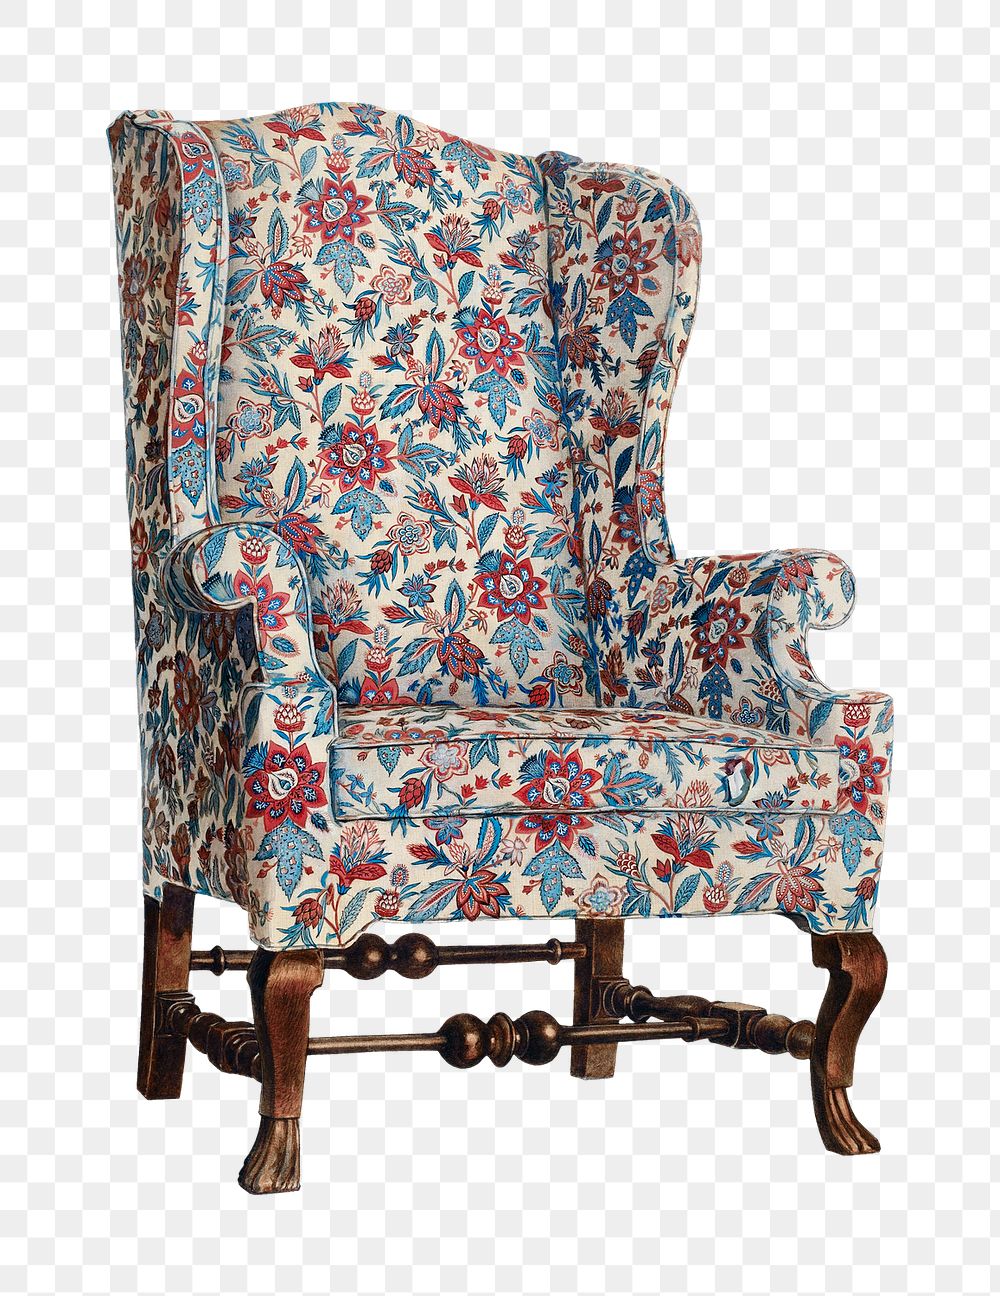 Vintage wing chair png illustration, remixed from the artwork by Rolland Livingstone